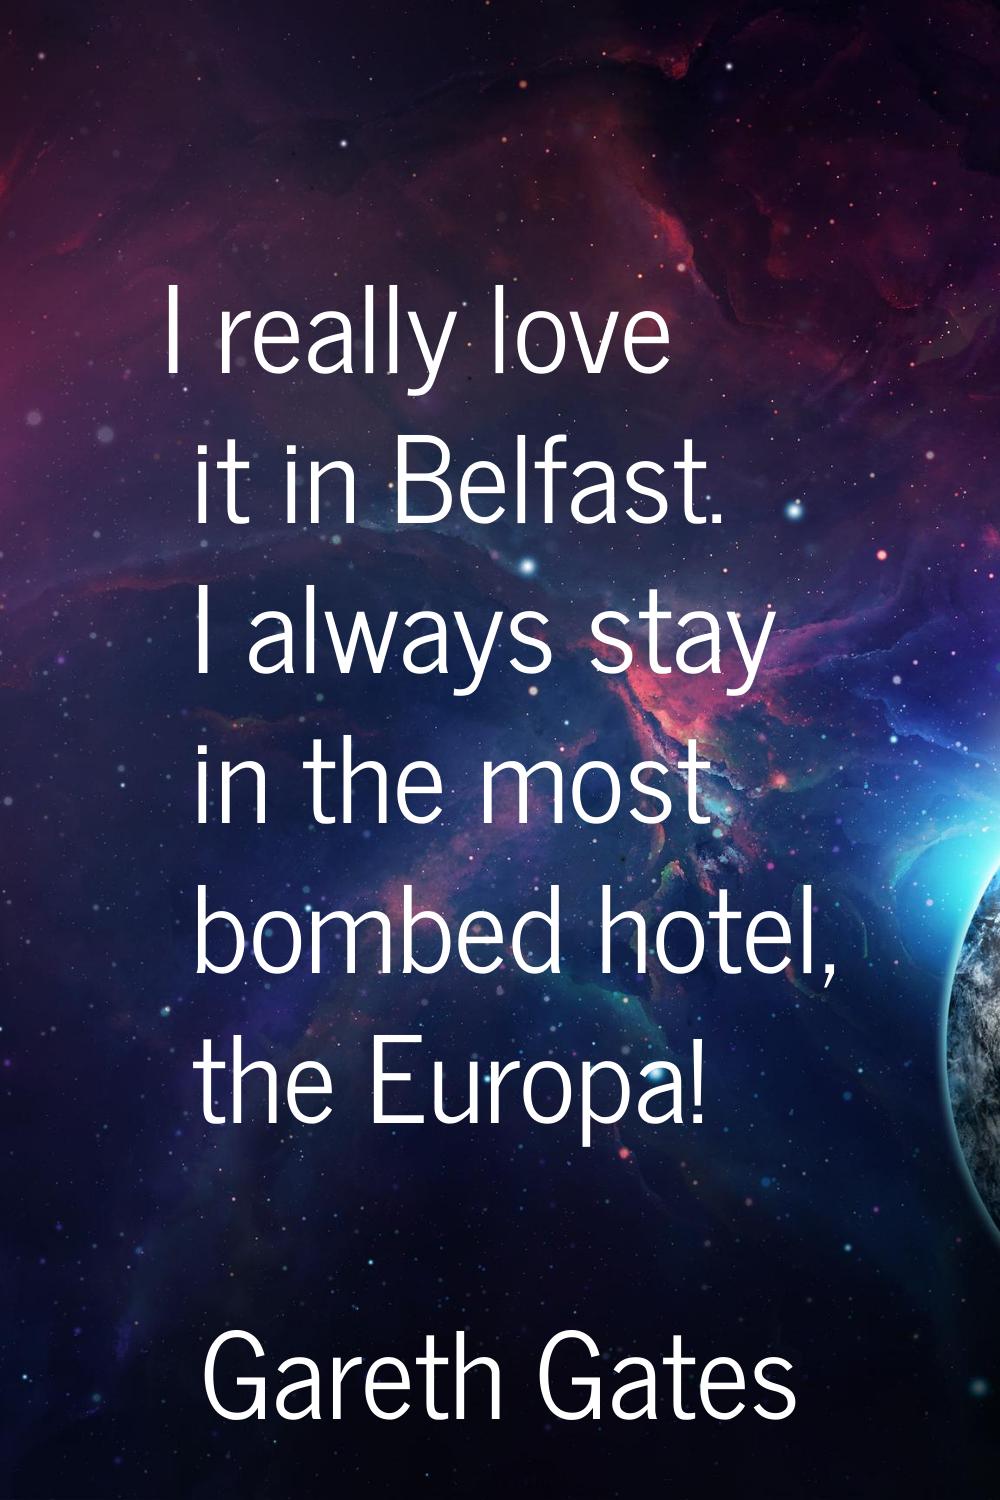 I really love it in Belfast. I always stay in the most bombed hotel, the Europa!